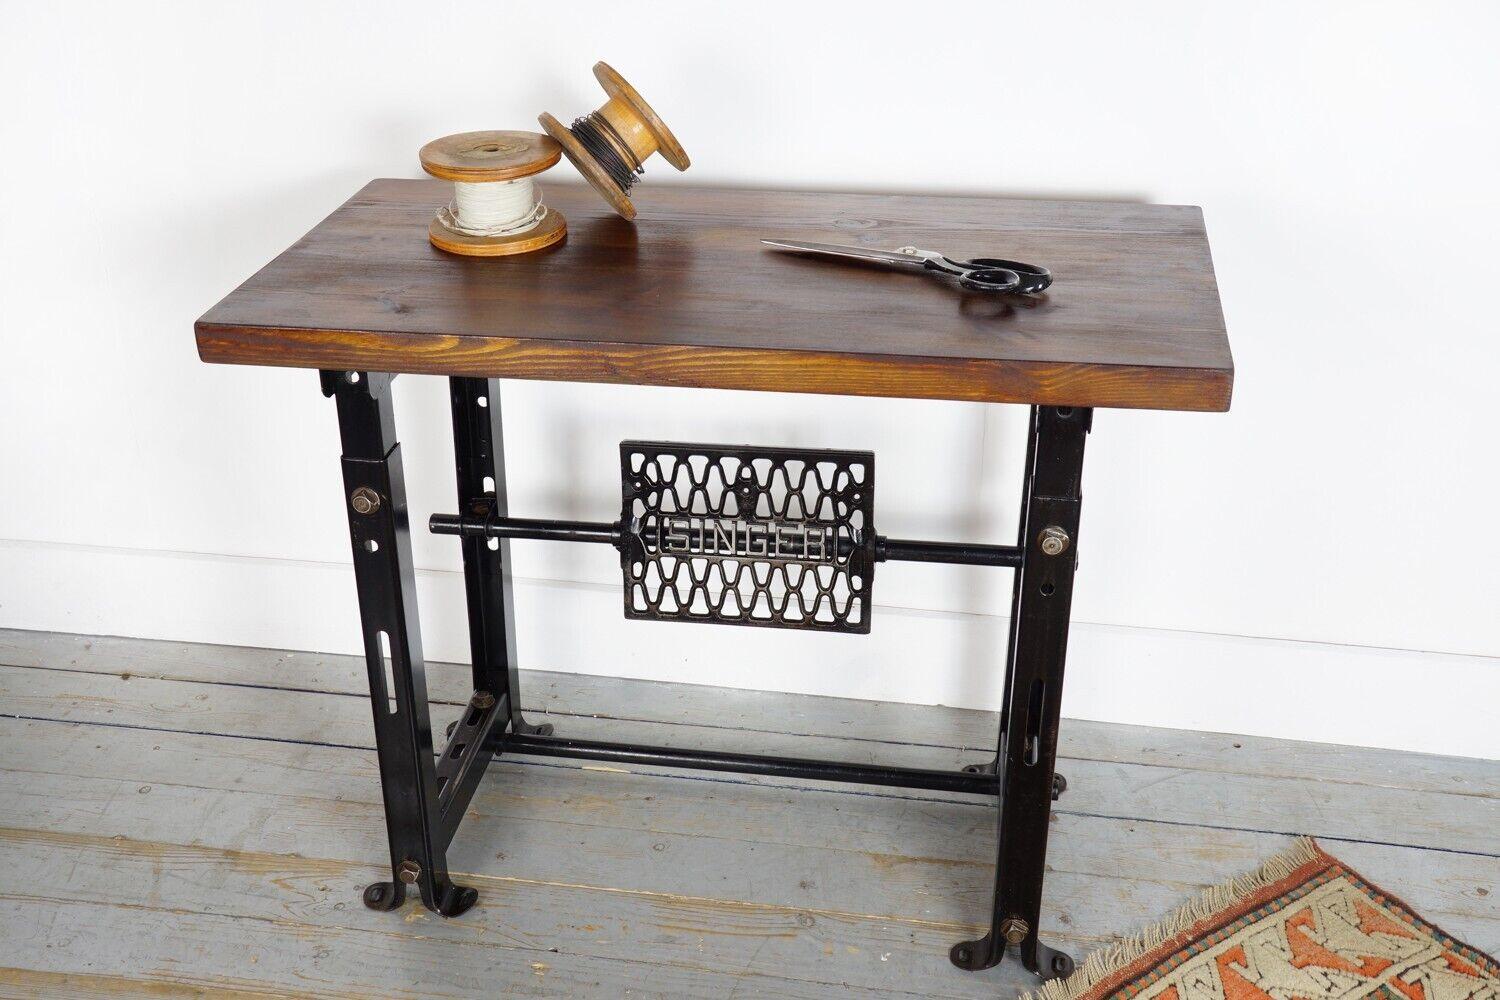 Industrial Metal Vintage Desk

This is a vintage machinist desk from the 1940s fitted with a reclaimed top. It has a metal stand that was made in Clydebank, Scotland, and features the original Singer manufacturer's stamp. 

The desk is well-weighted